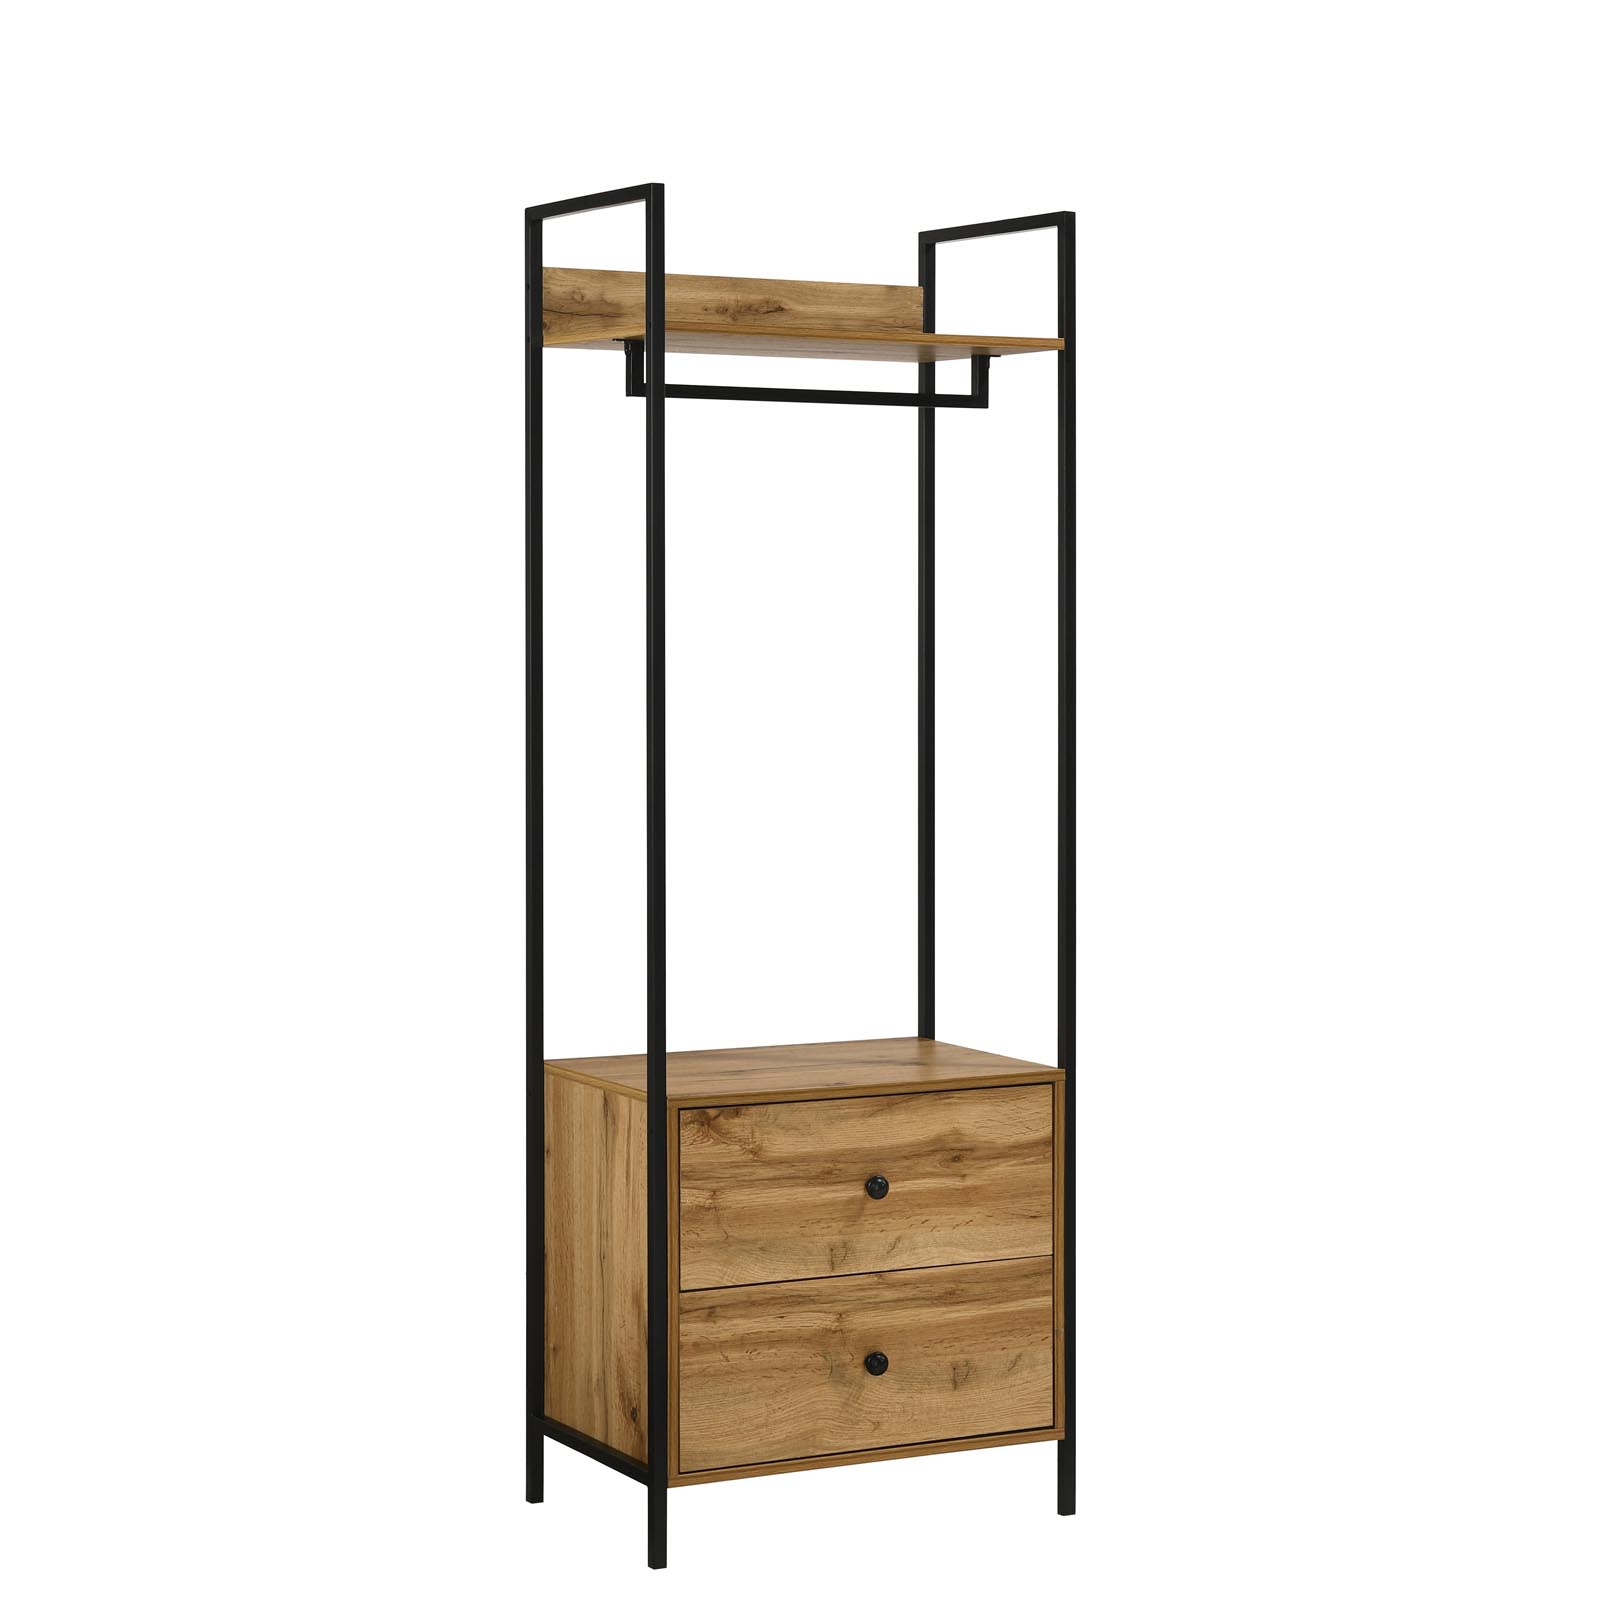 Zahra Open Wardrobe with 2 Drawers in Oak - Home Supplier